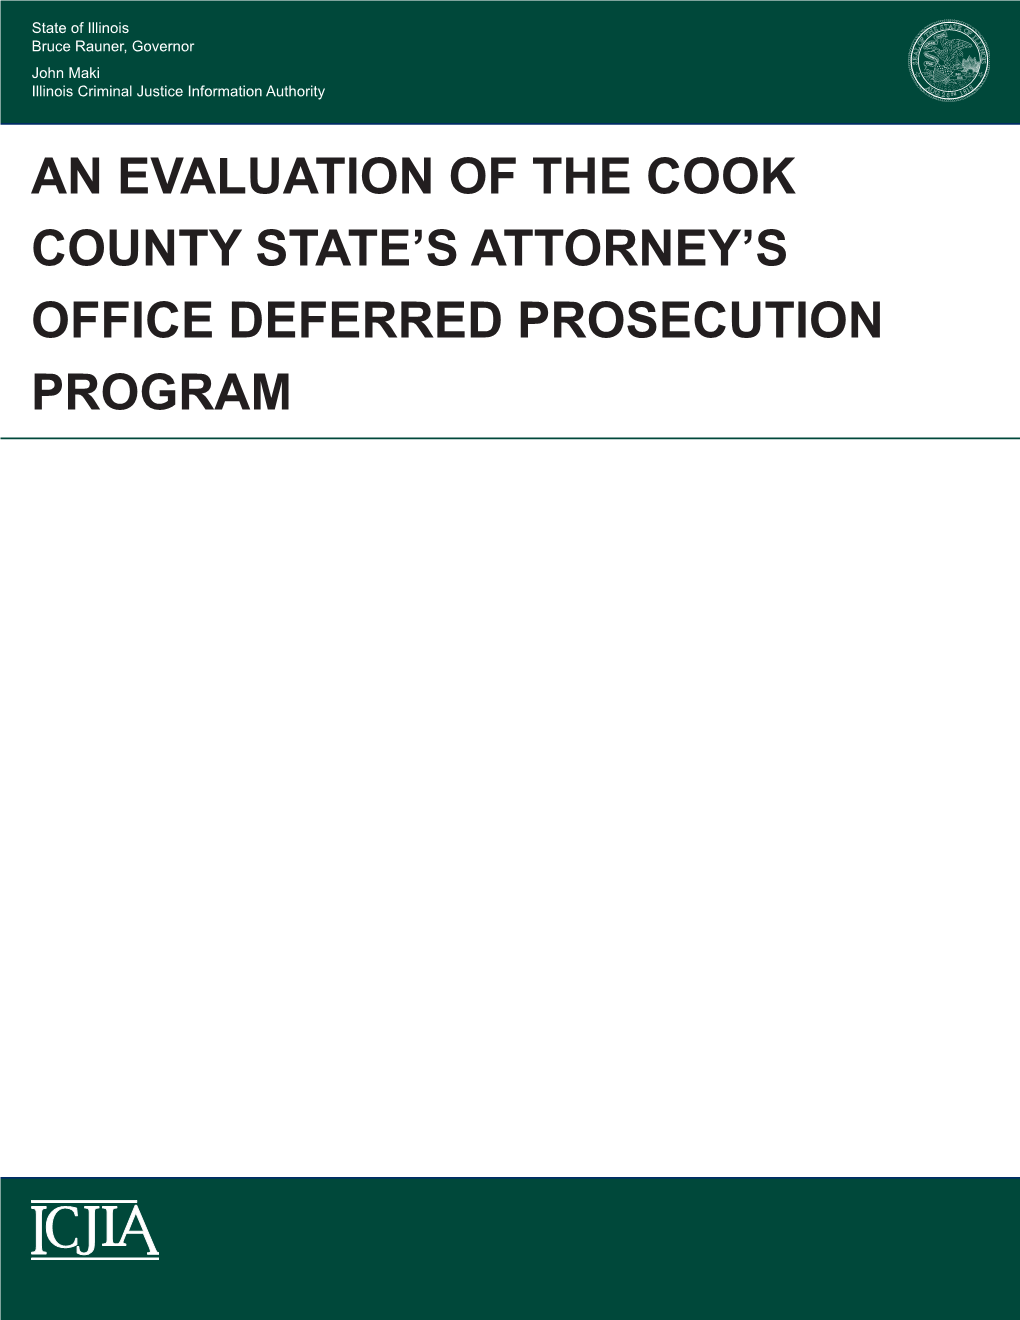 An Evaluation of the Cook County State's Attorney's Office Deferred Prosecution Program